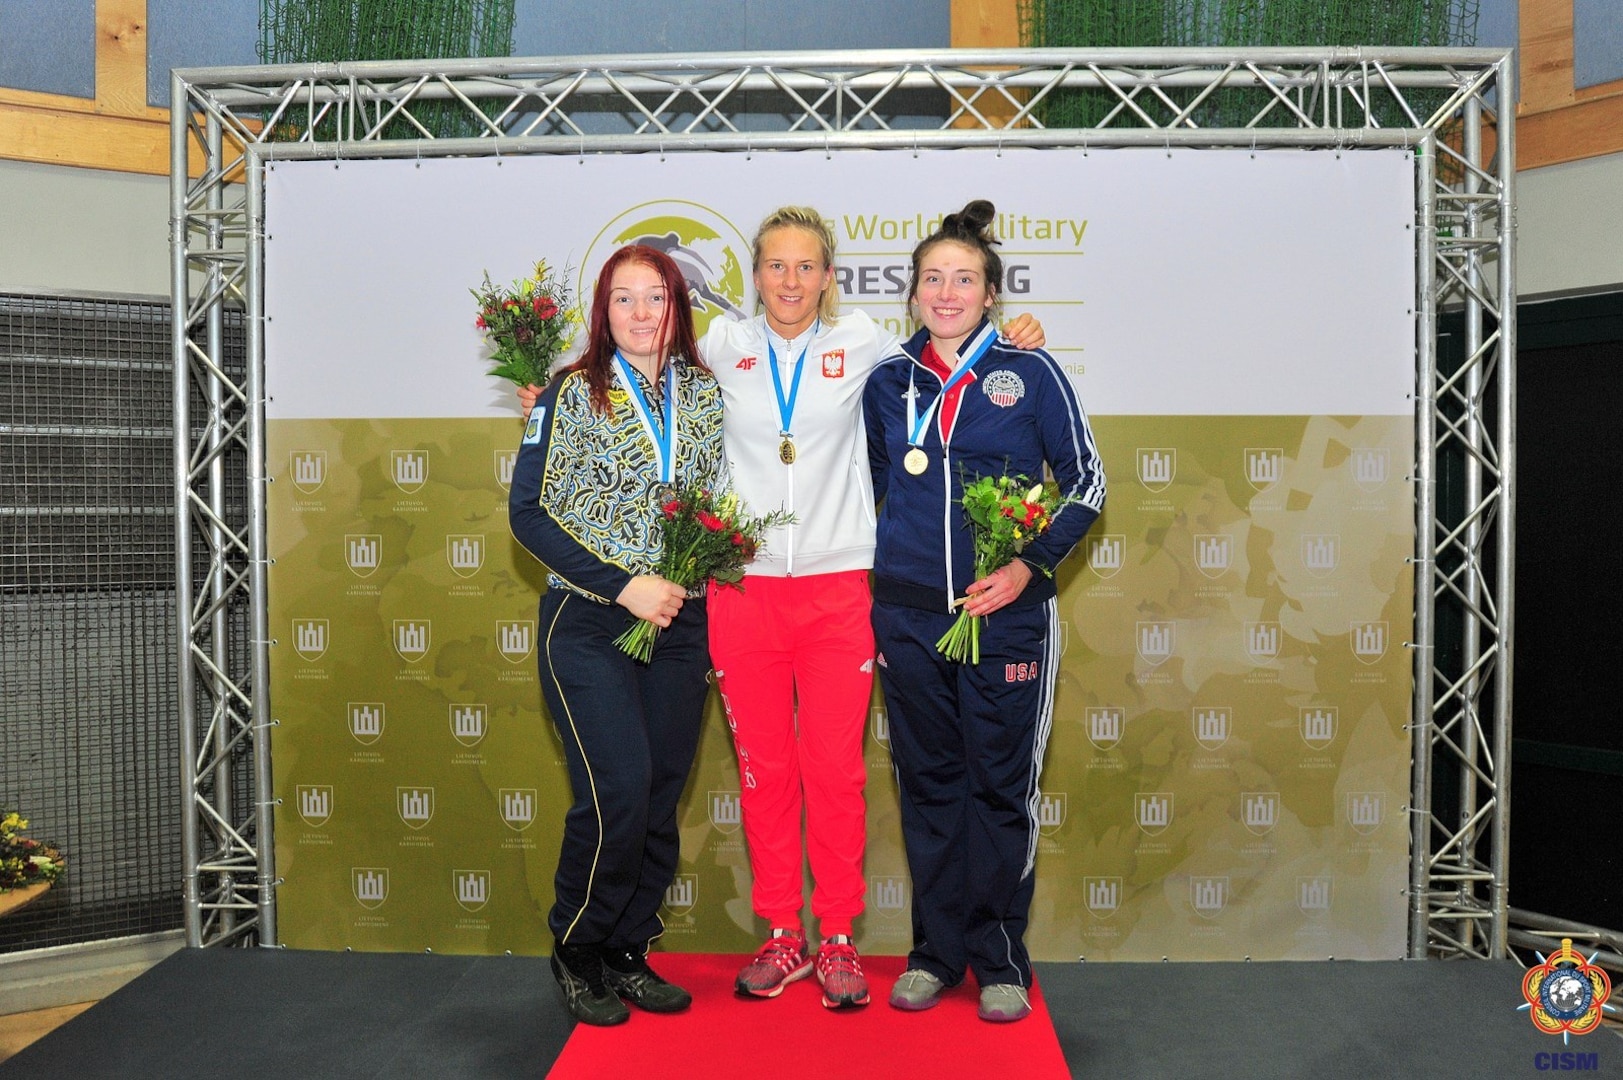 PV2 Anastasia Lobsinger of the U.S. Army captured a bronze medal at 75 kg/165 lbs. in women’s freestyle on Saturday, the final day of the CISM World Military Championships.